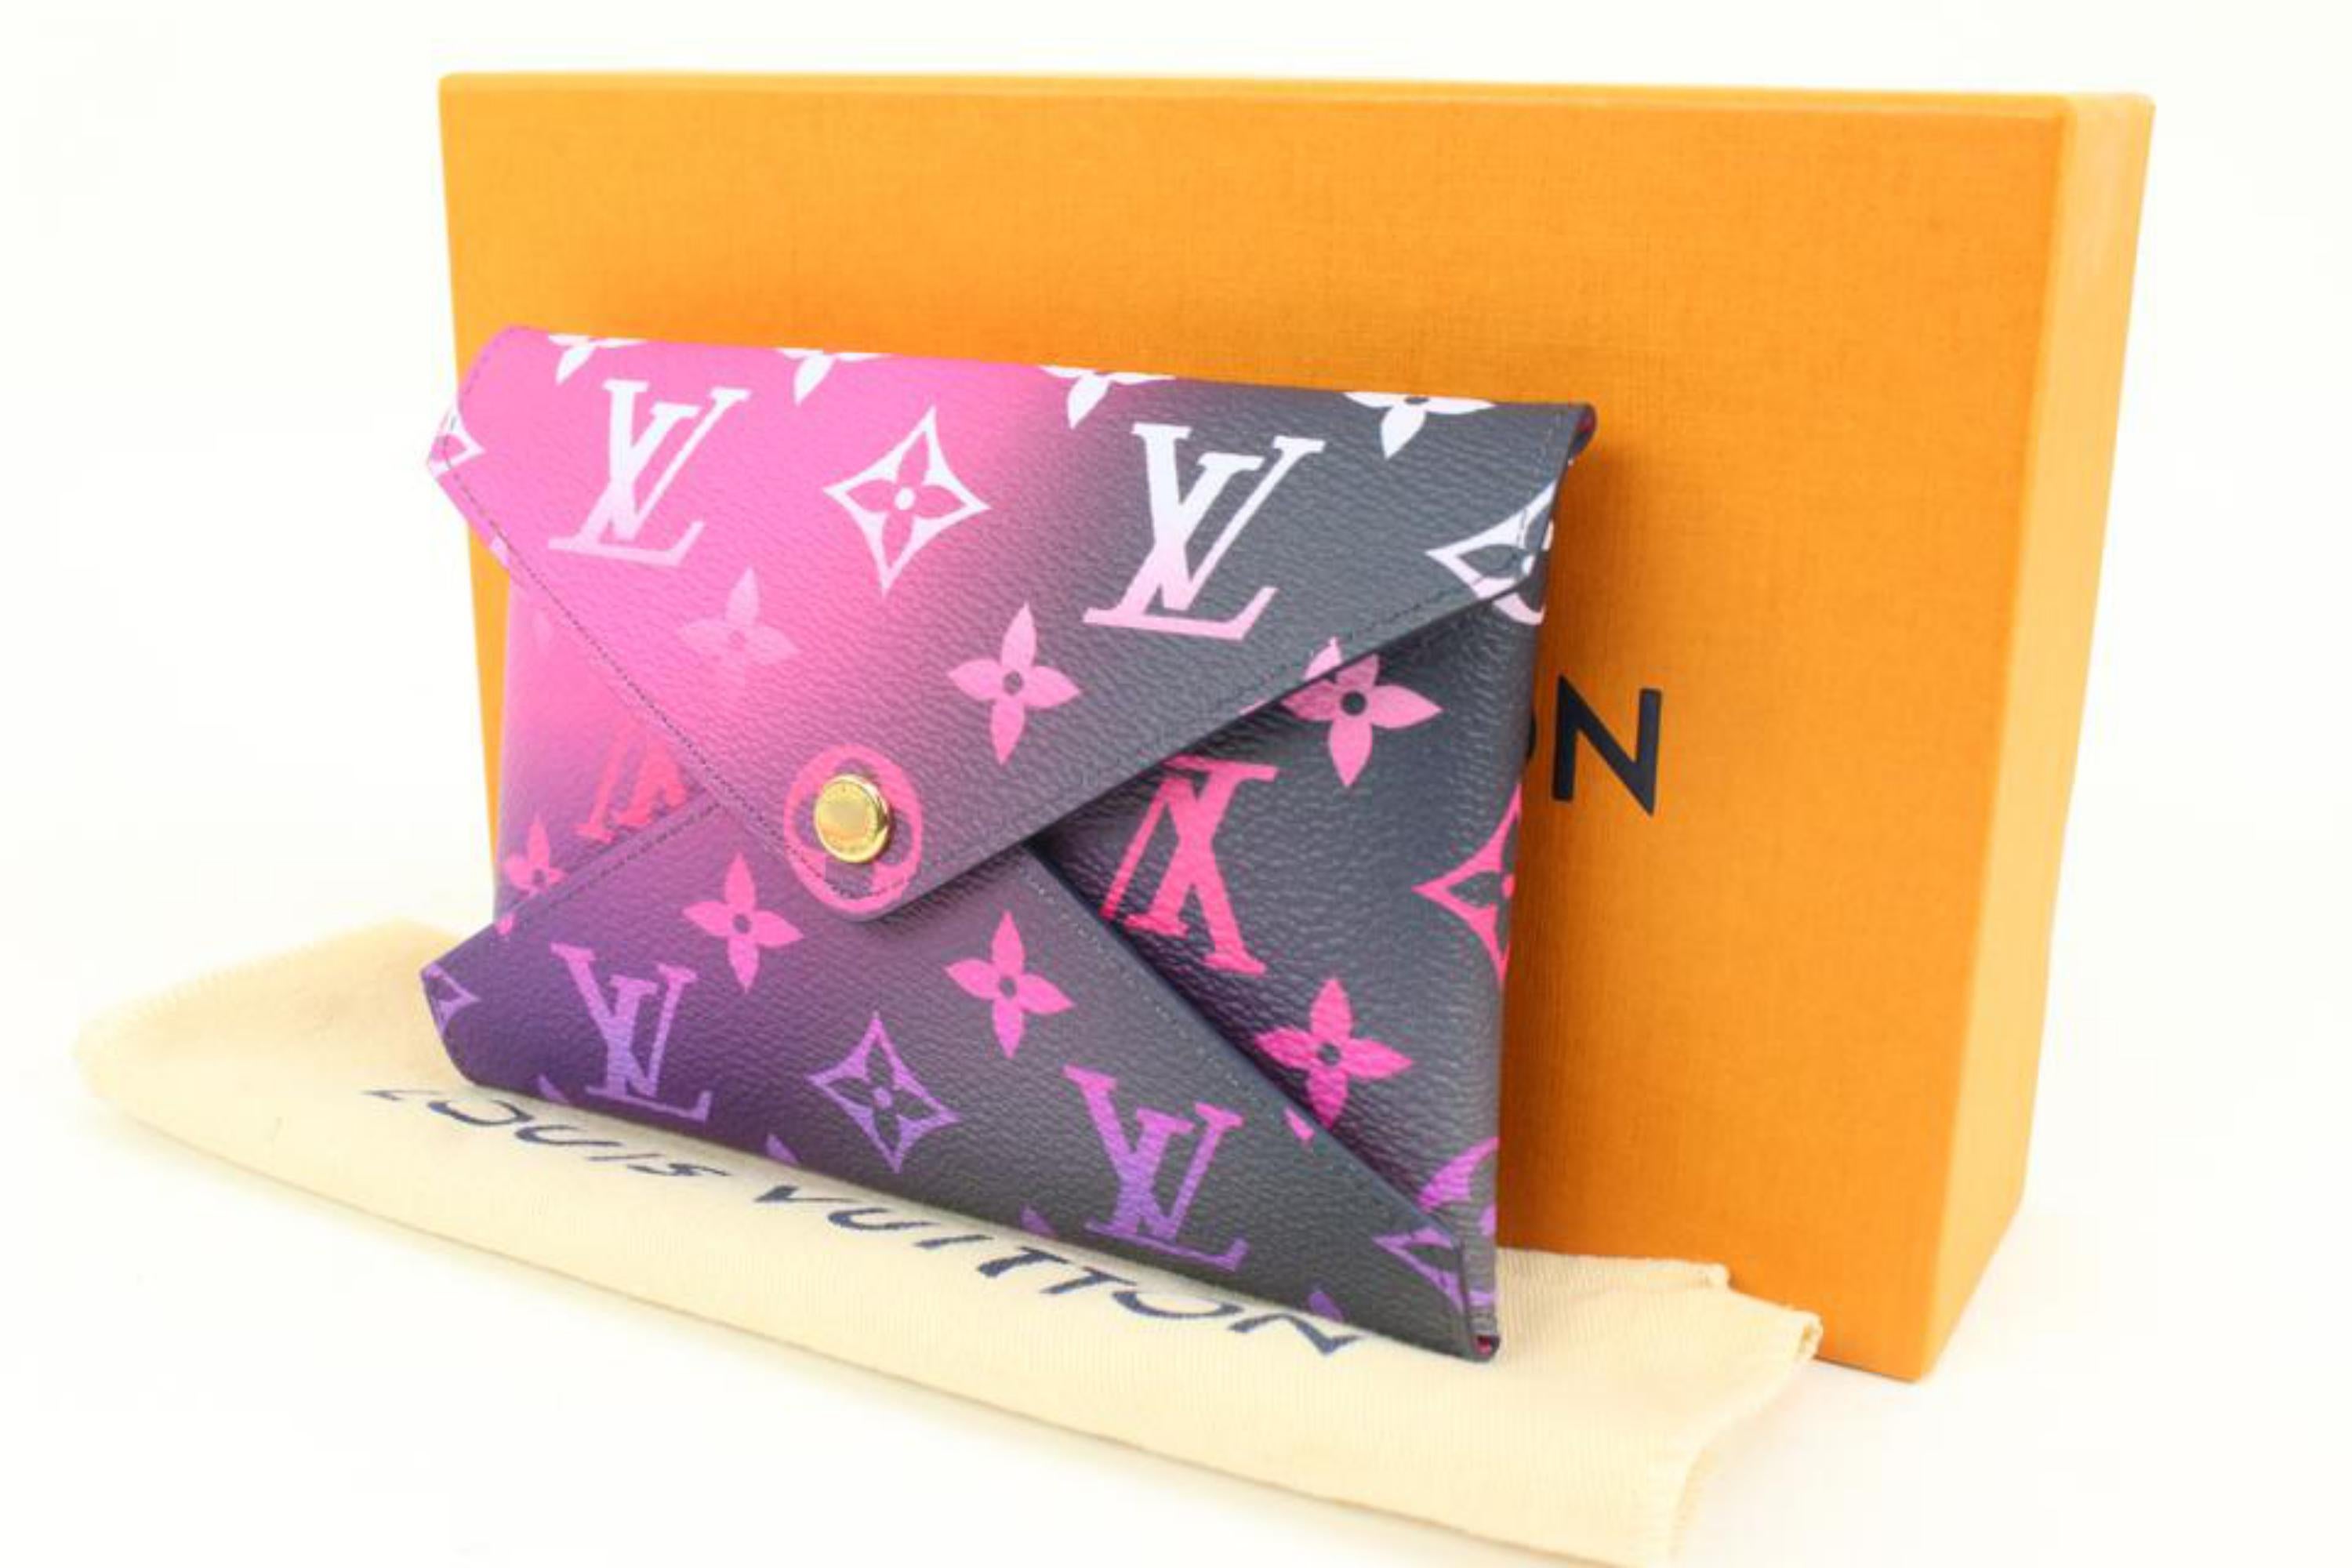 Louis Vuitton Midnight Fuchsia Monogram Kirigami MM Pochette 65lz418s
Date Code/Serial Number: RFID Chip
Made In: France
Measurements: Length:  6.2